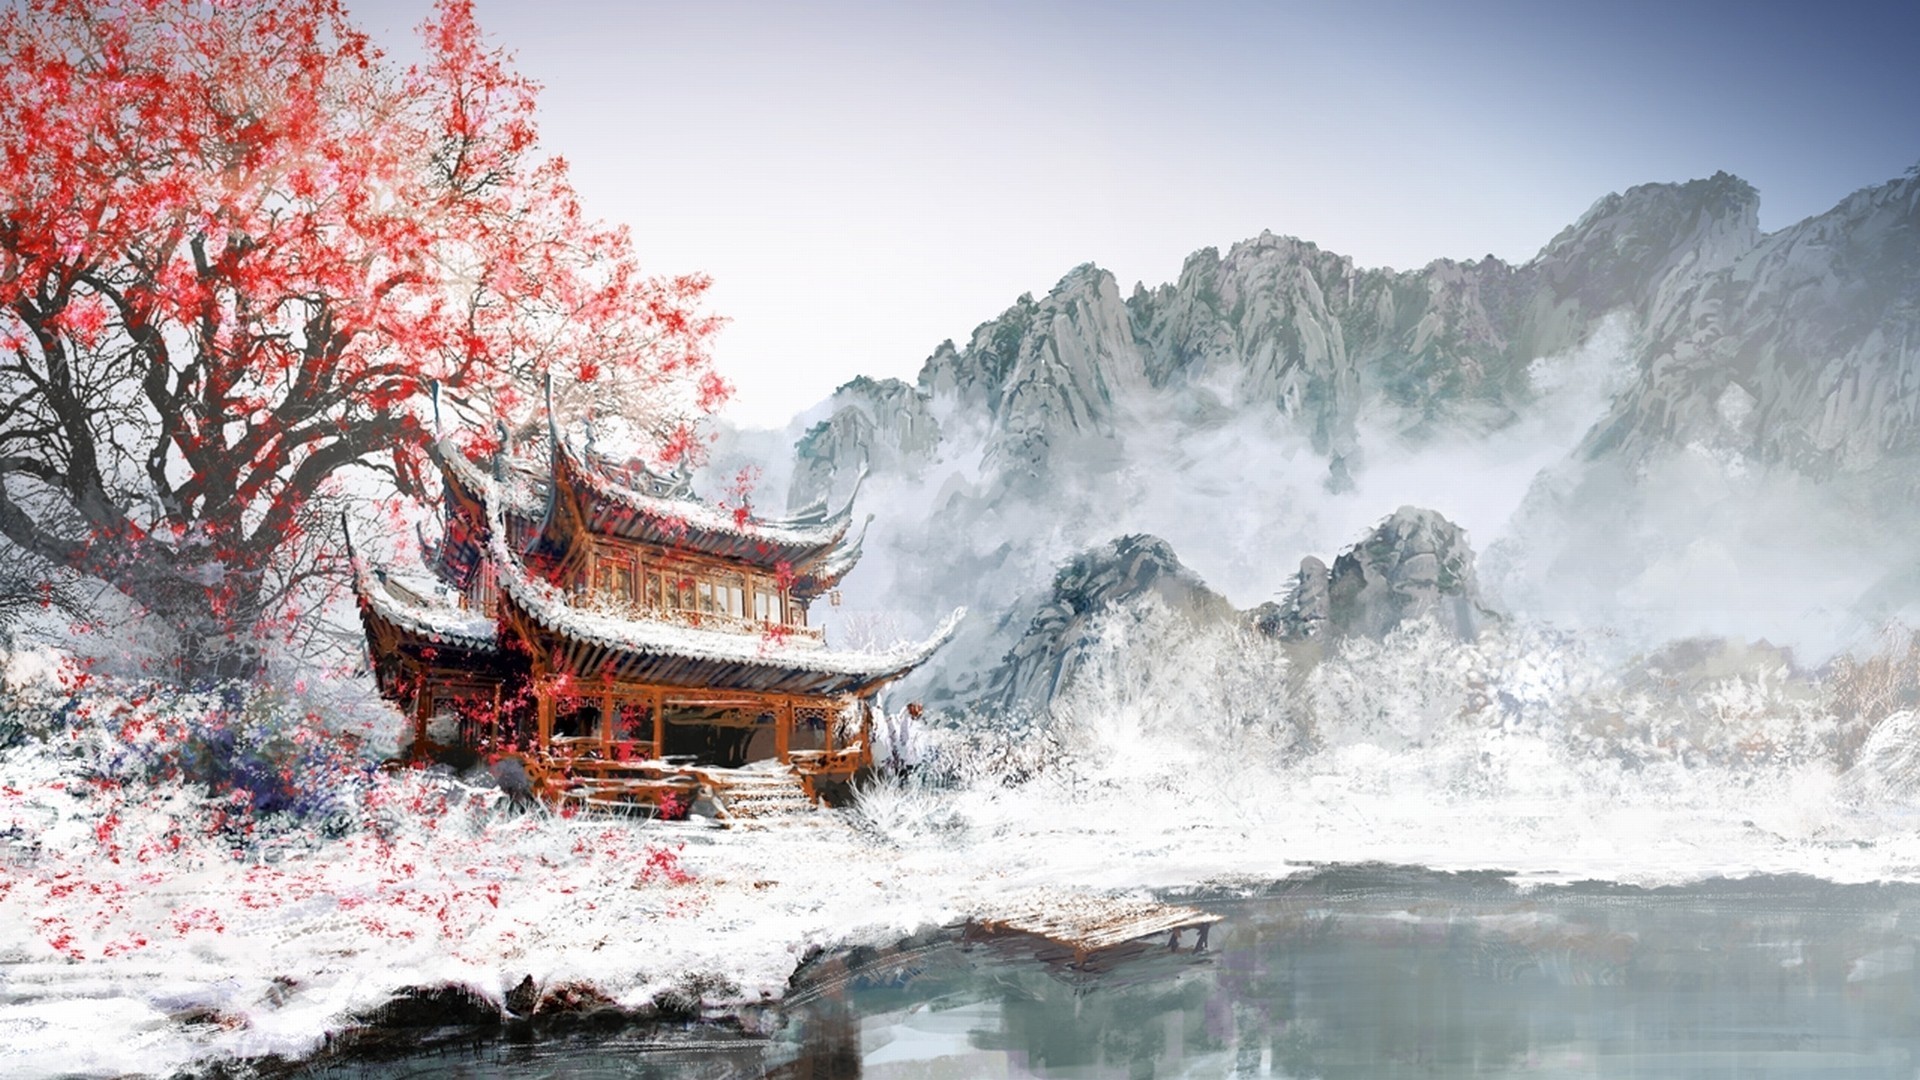 Painting, Japan, Winter, White, Snow, Mountain, Cherry Blossom Wallpapers HD / Desktop and Mobile Backgrounds